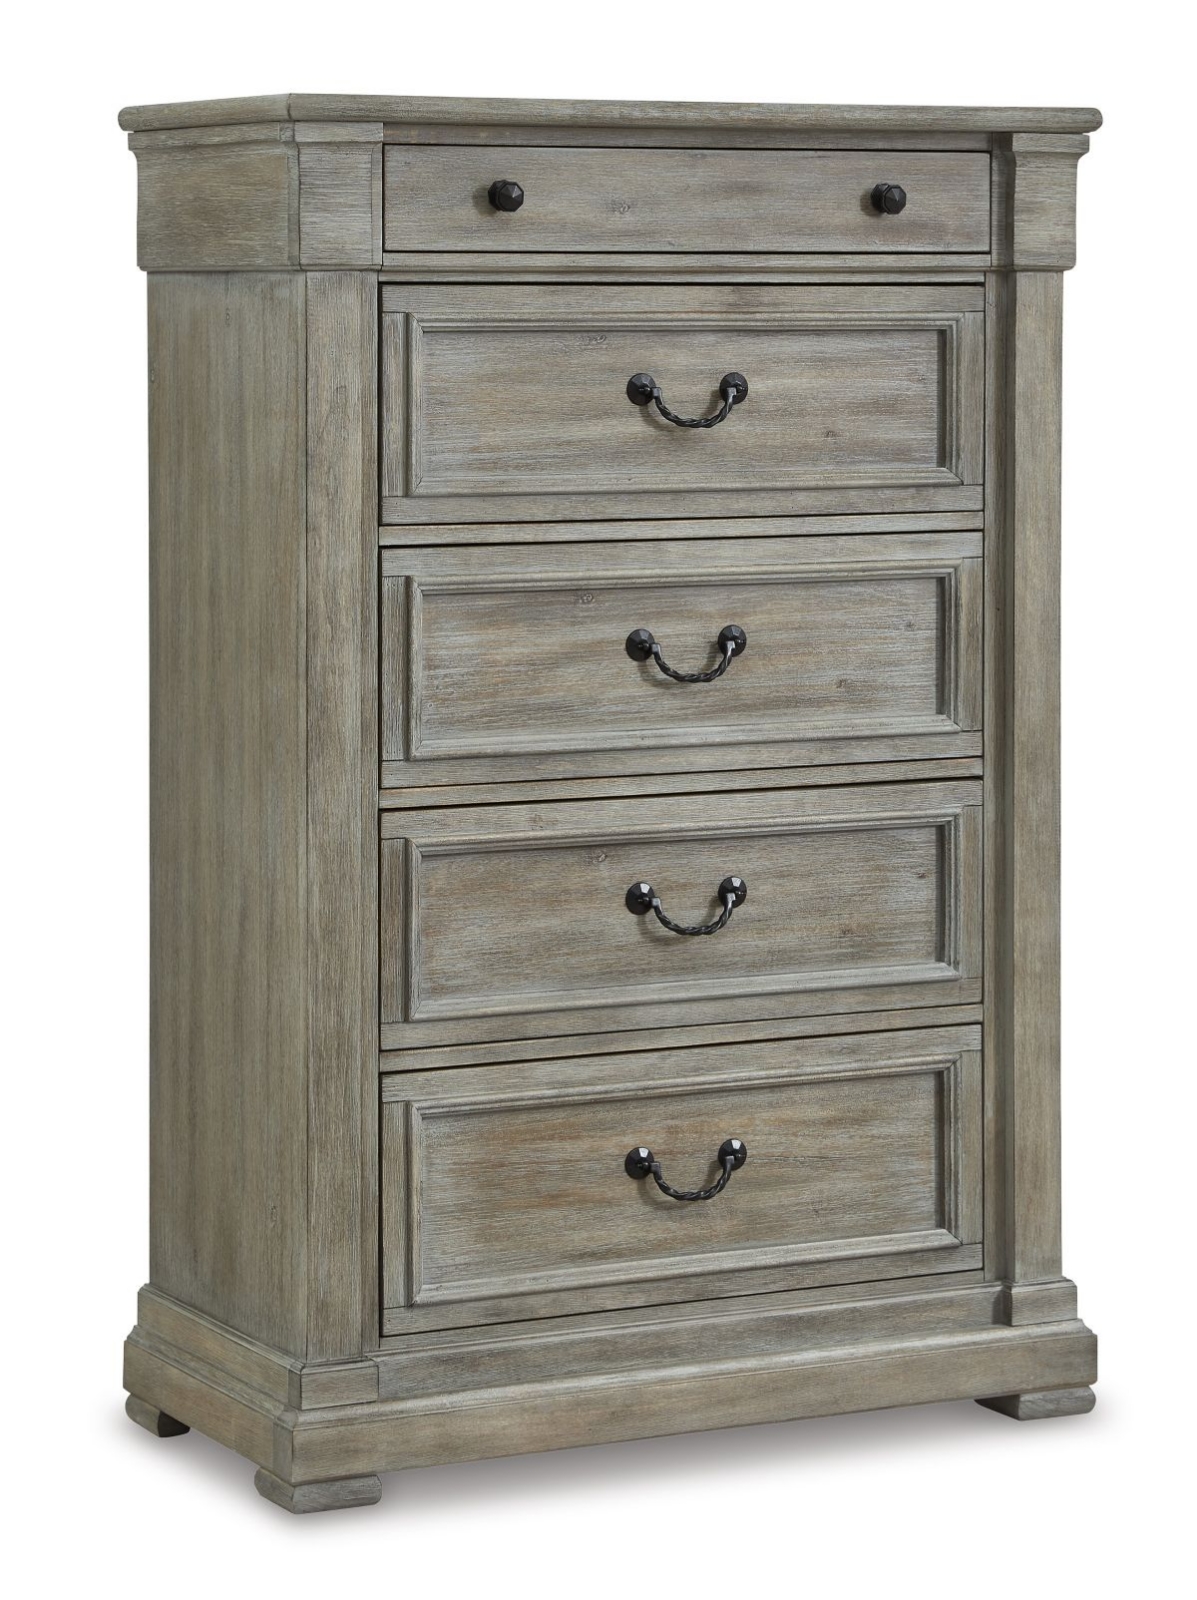 Picture of Moreshire Chest of Drawers